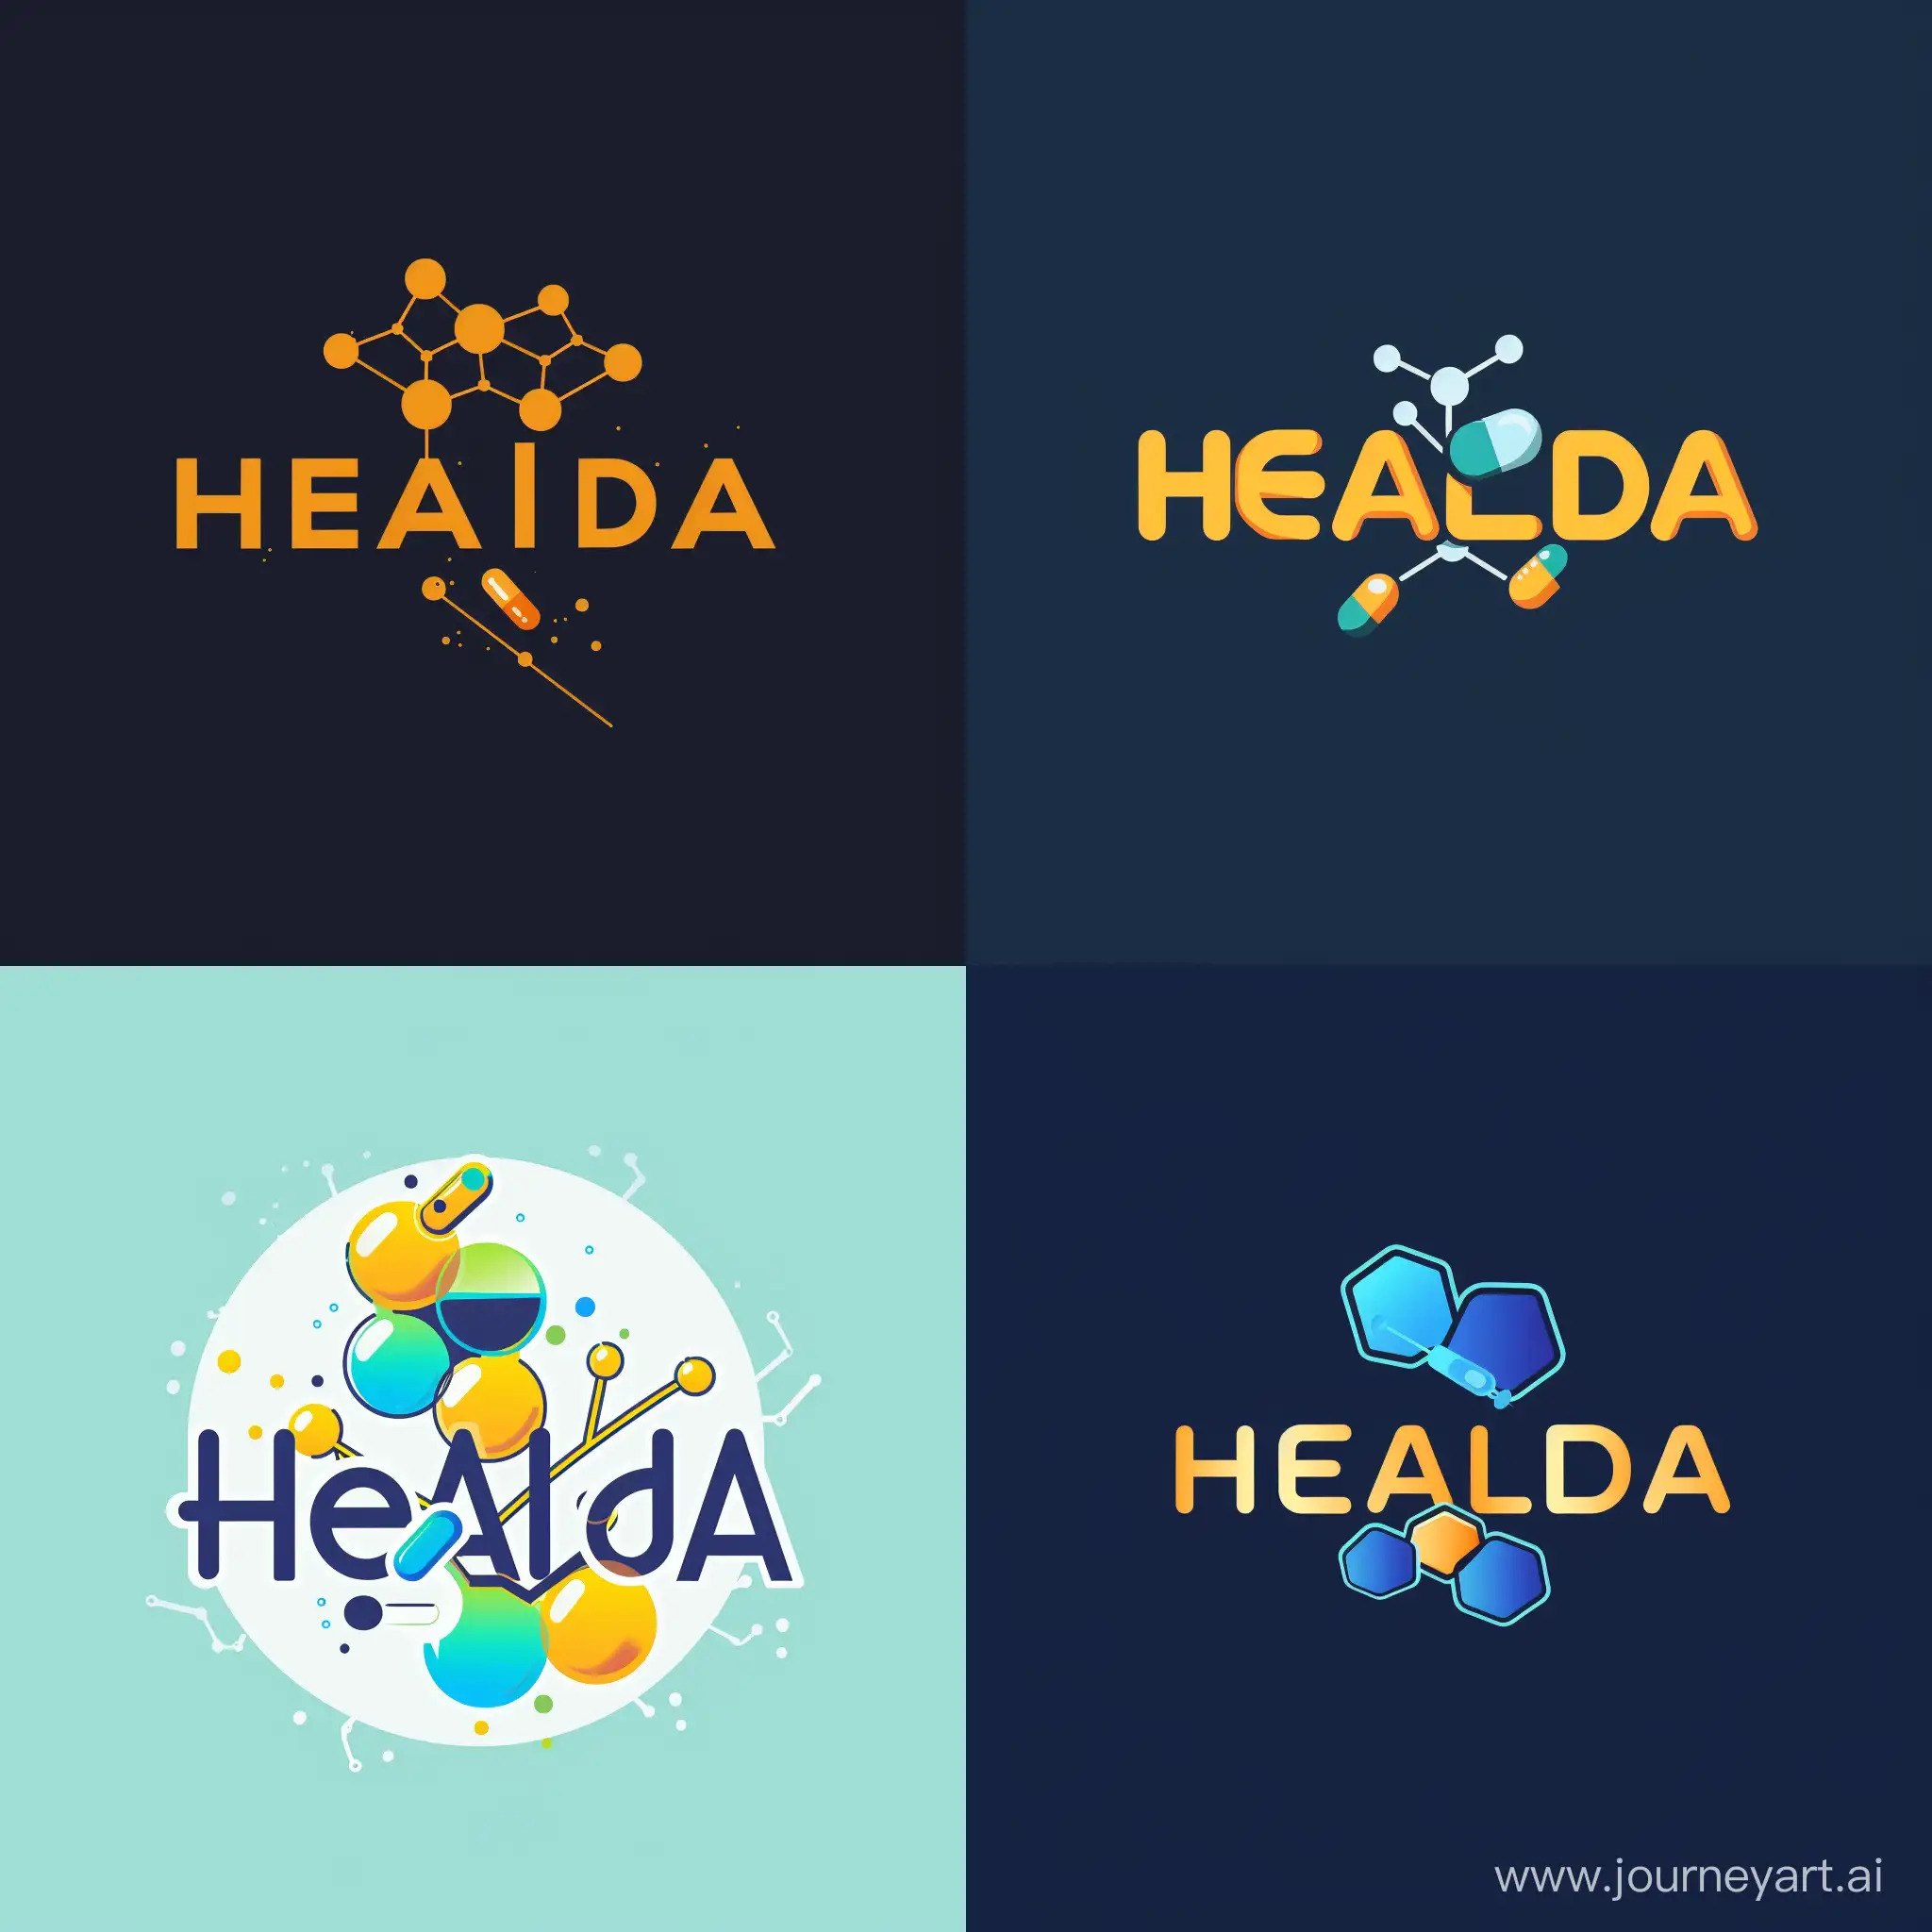 create a wordmark logo for "Healda" using a chemical icon indicative of the letter H and a medicine icon suggestive of the letter A. This design should represent the fusion of chemistry and medicine in a harmonious and impactful way.
